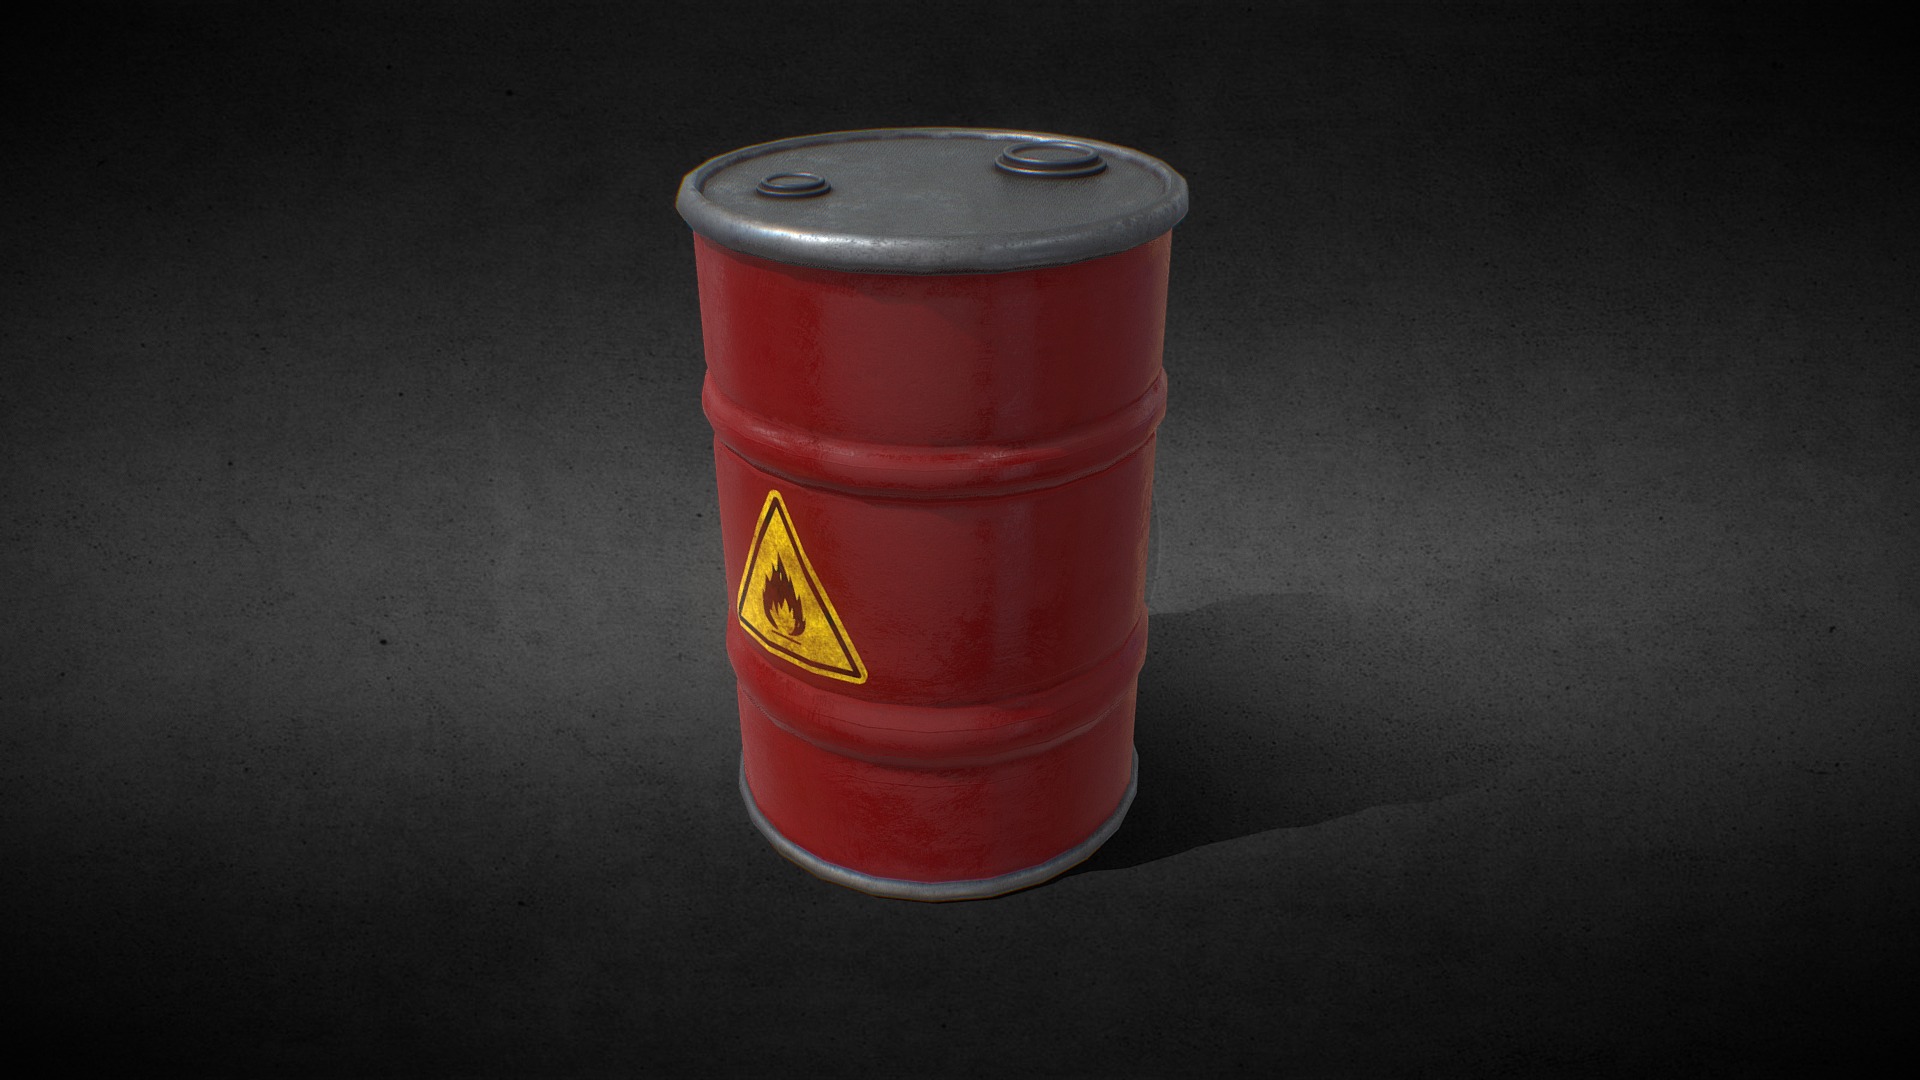 3D model Barrel with flammable materials - This is a 3D model of the Barrel with flammable materials. The 3D model is about a red trash can.